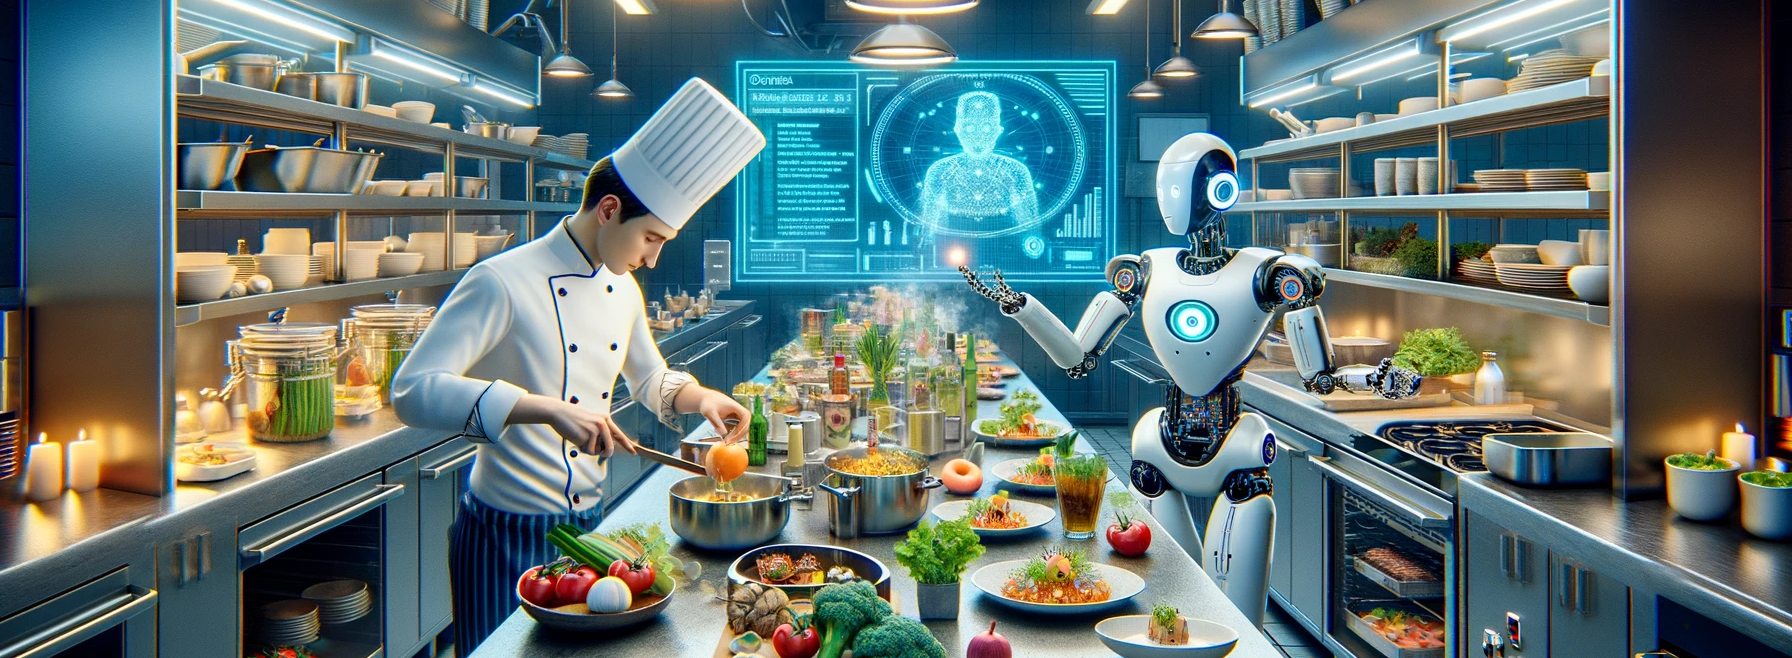 Is the Restaurant Industry Ready for the Next Technological Revolution?